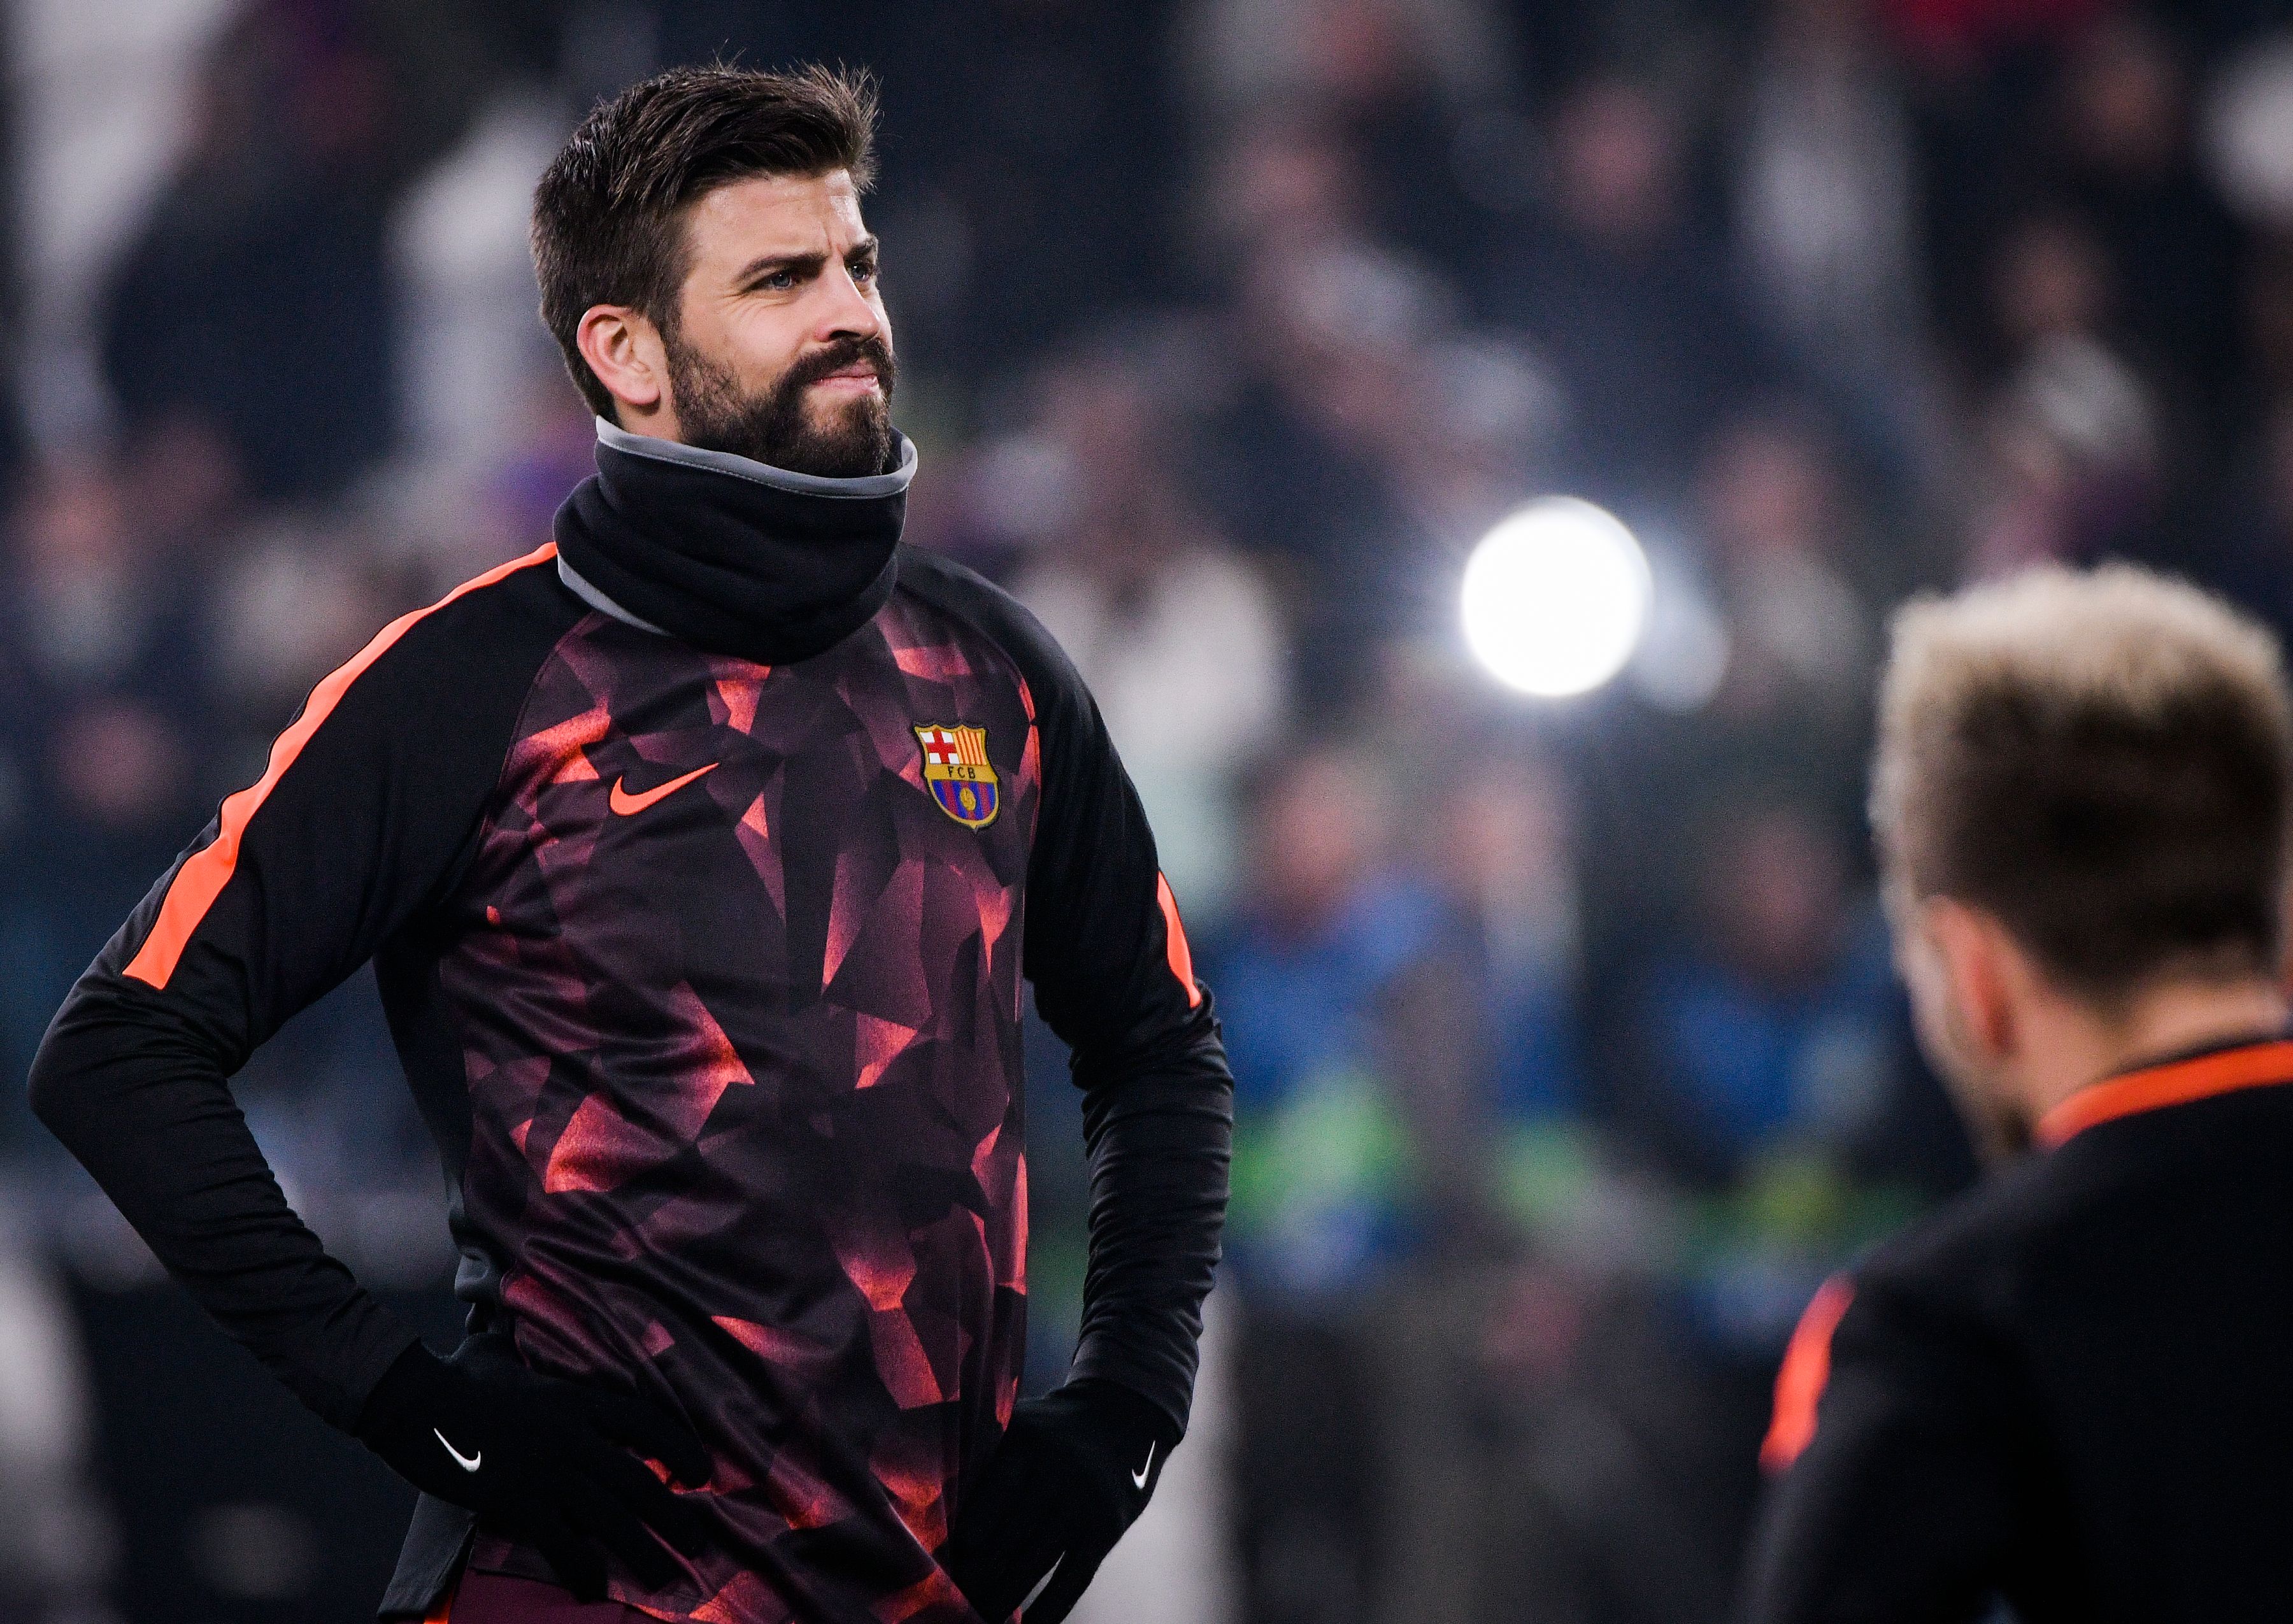 Barcelona's Spanish defender Gerard Pique looks on before the UEFA Champions League Group D football match Juventus Barcelona on November 22, 2017 at the Juventus stadium in Turin.  / AFP PHOTO / Federico TARDITO        (Photo credit should read FEDERICO TARDITO/AFP/Getty Images)